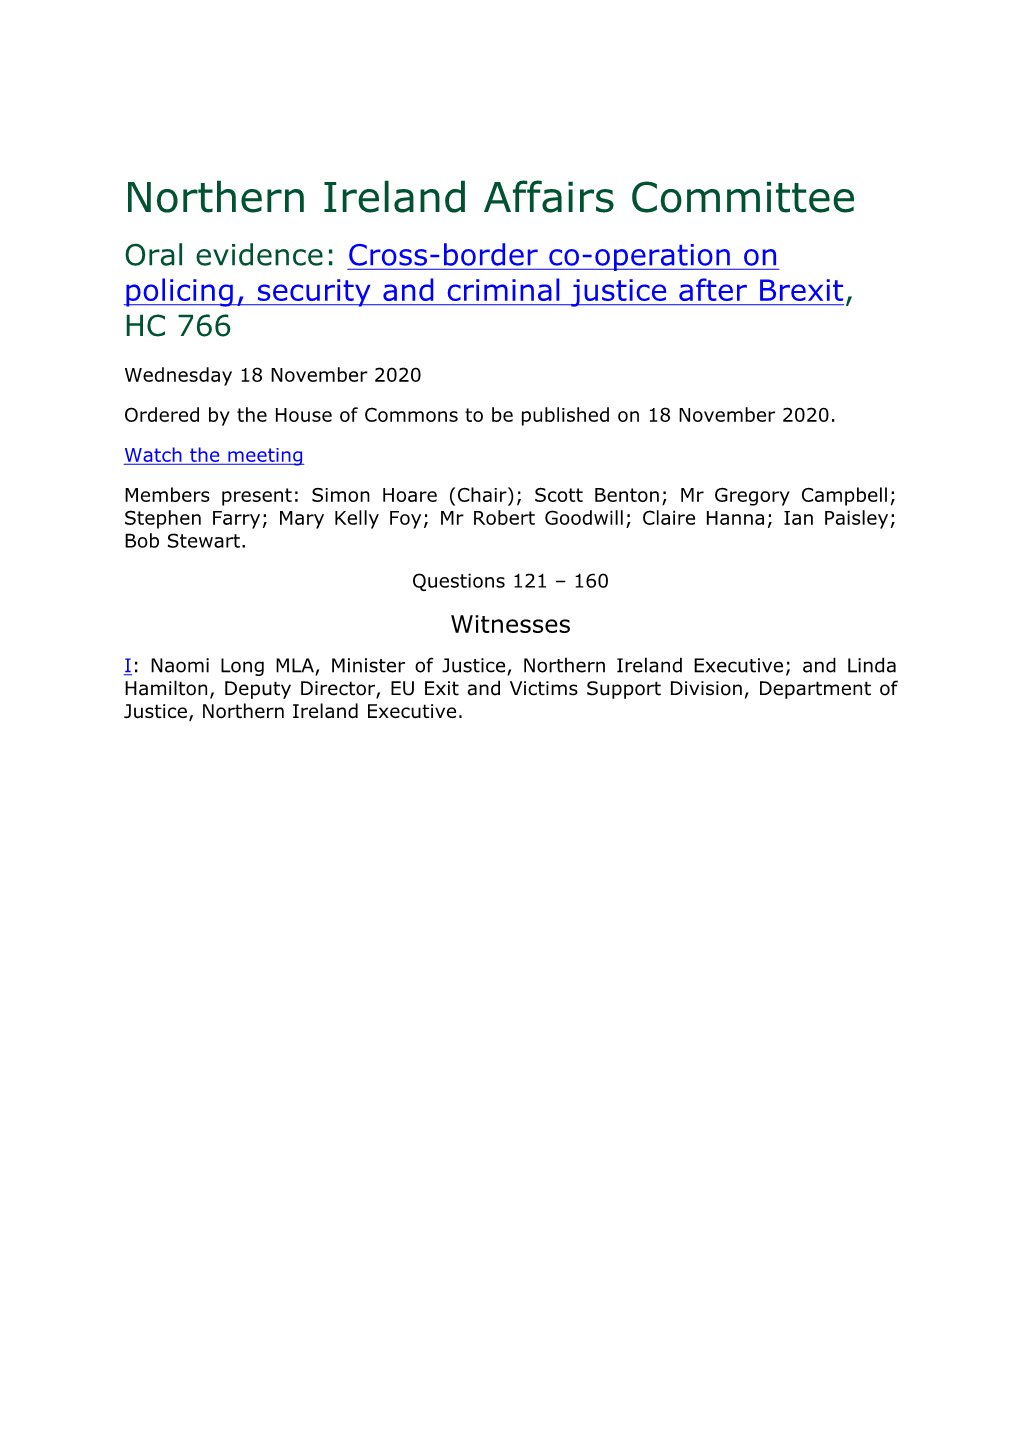 Northern Ireland Affairs Committee Oral Evidence: Cross-Border Co-Operation on Policing, Security and Criminal Justice After Brexit, HC 766